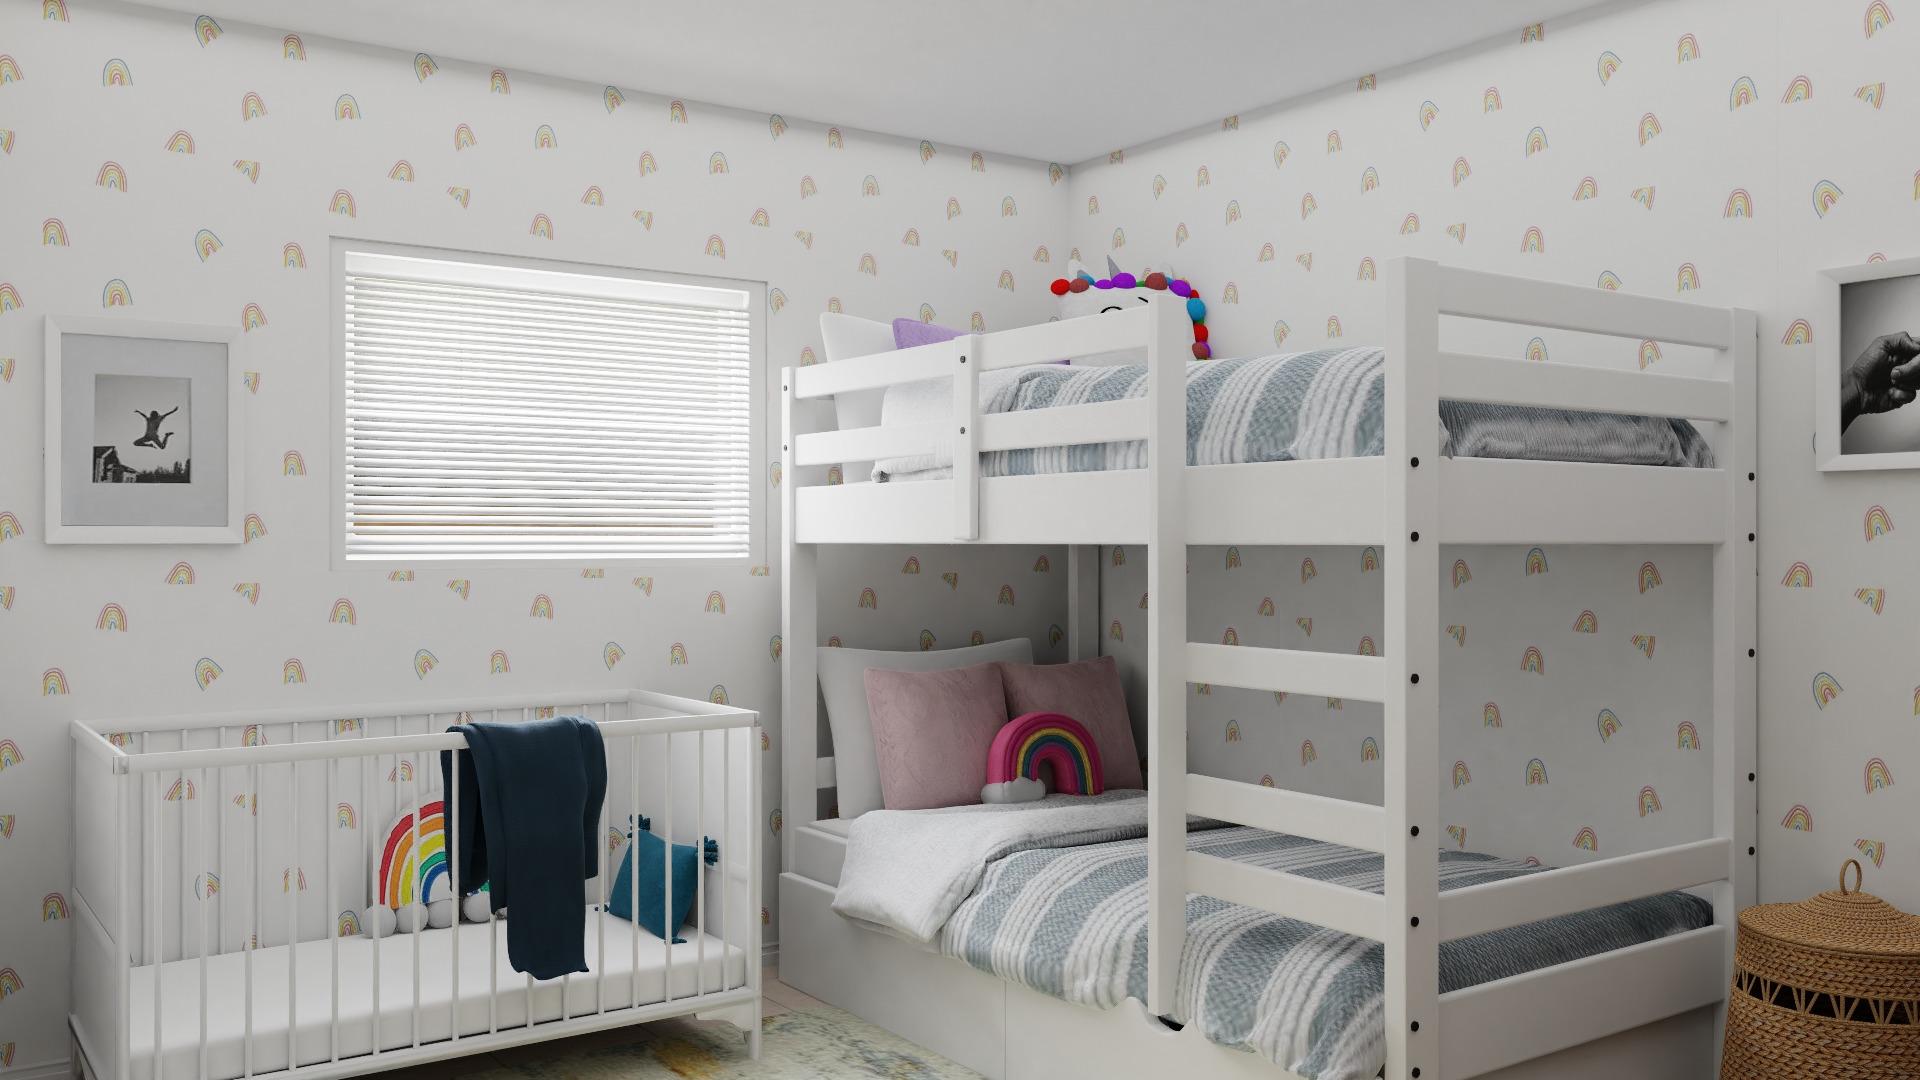 A Transitional Modern Kids Bedroom Designed to Ignite Creativity